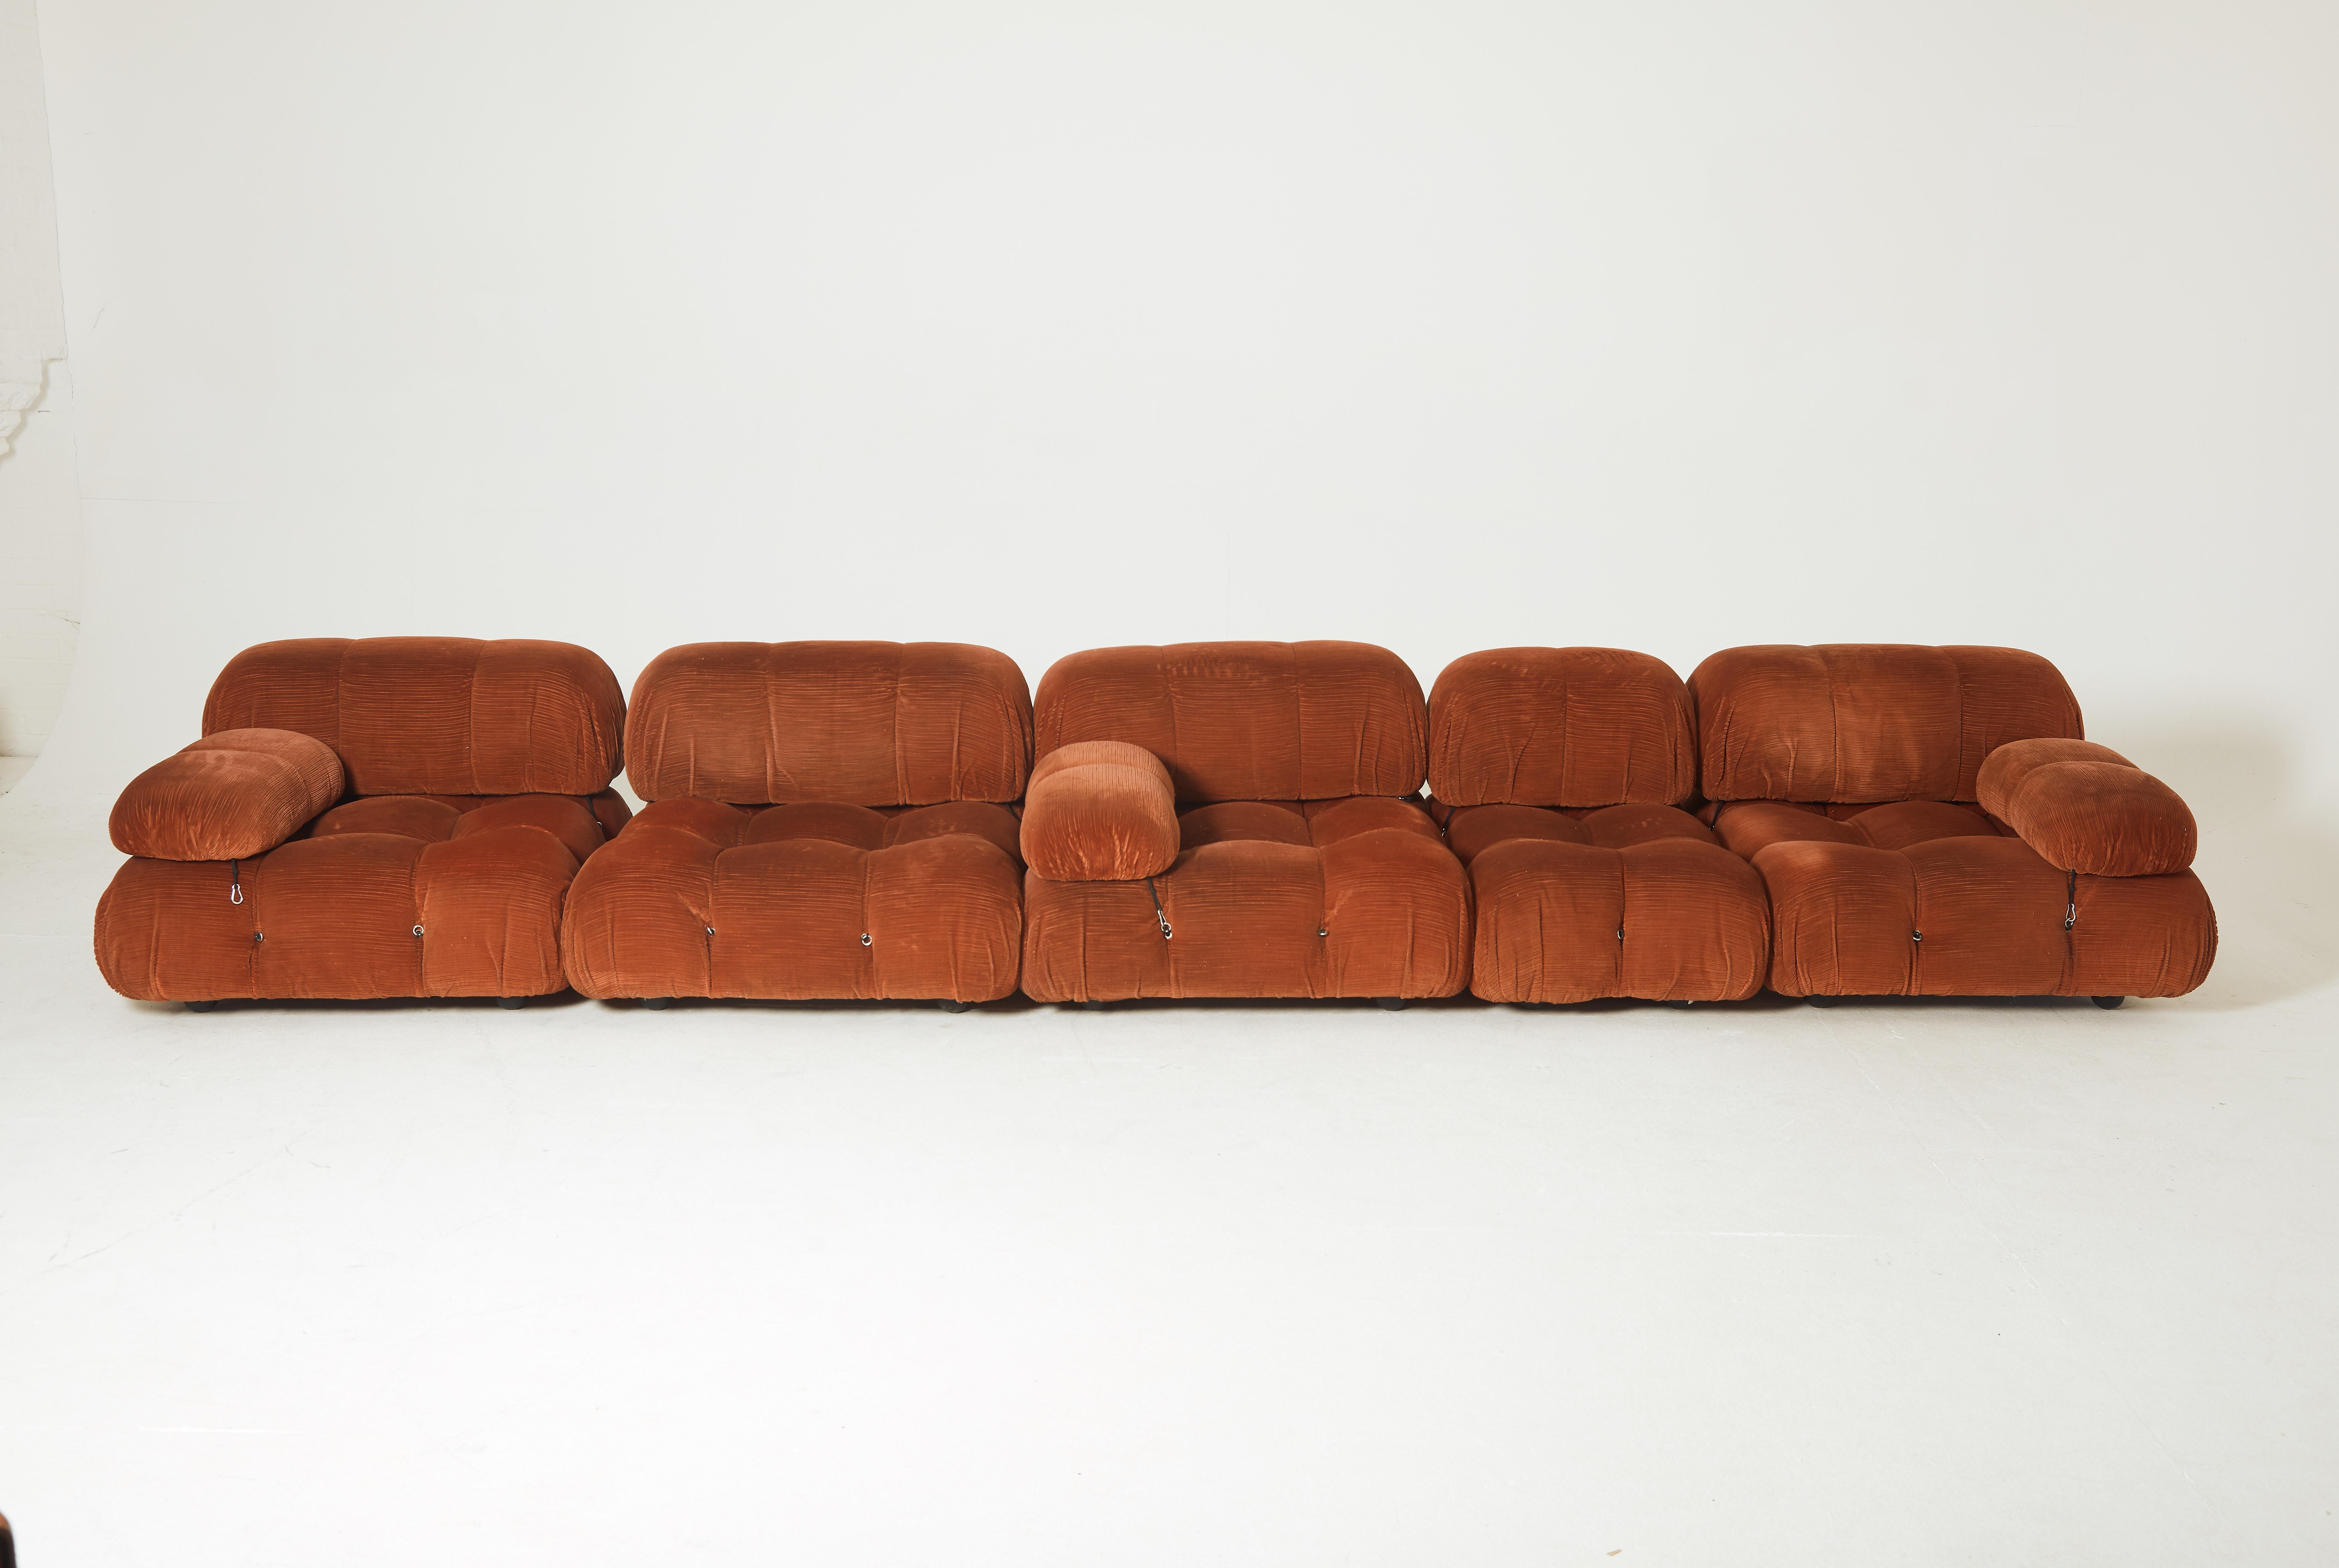 An extremely comfortable Mario Bellini Camaleonda modular sofa, made by C&B Italia (pre-B&B Italia), Italy, 1970s. Fabric is worn and damaged so this is sold for re-covering in your own choice of fabric. All parts are interchangeable. Can be